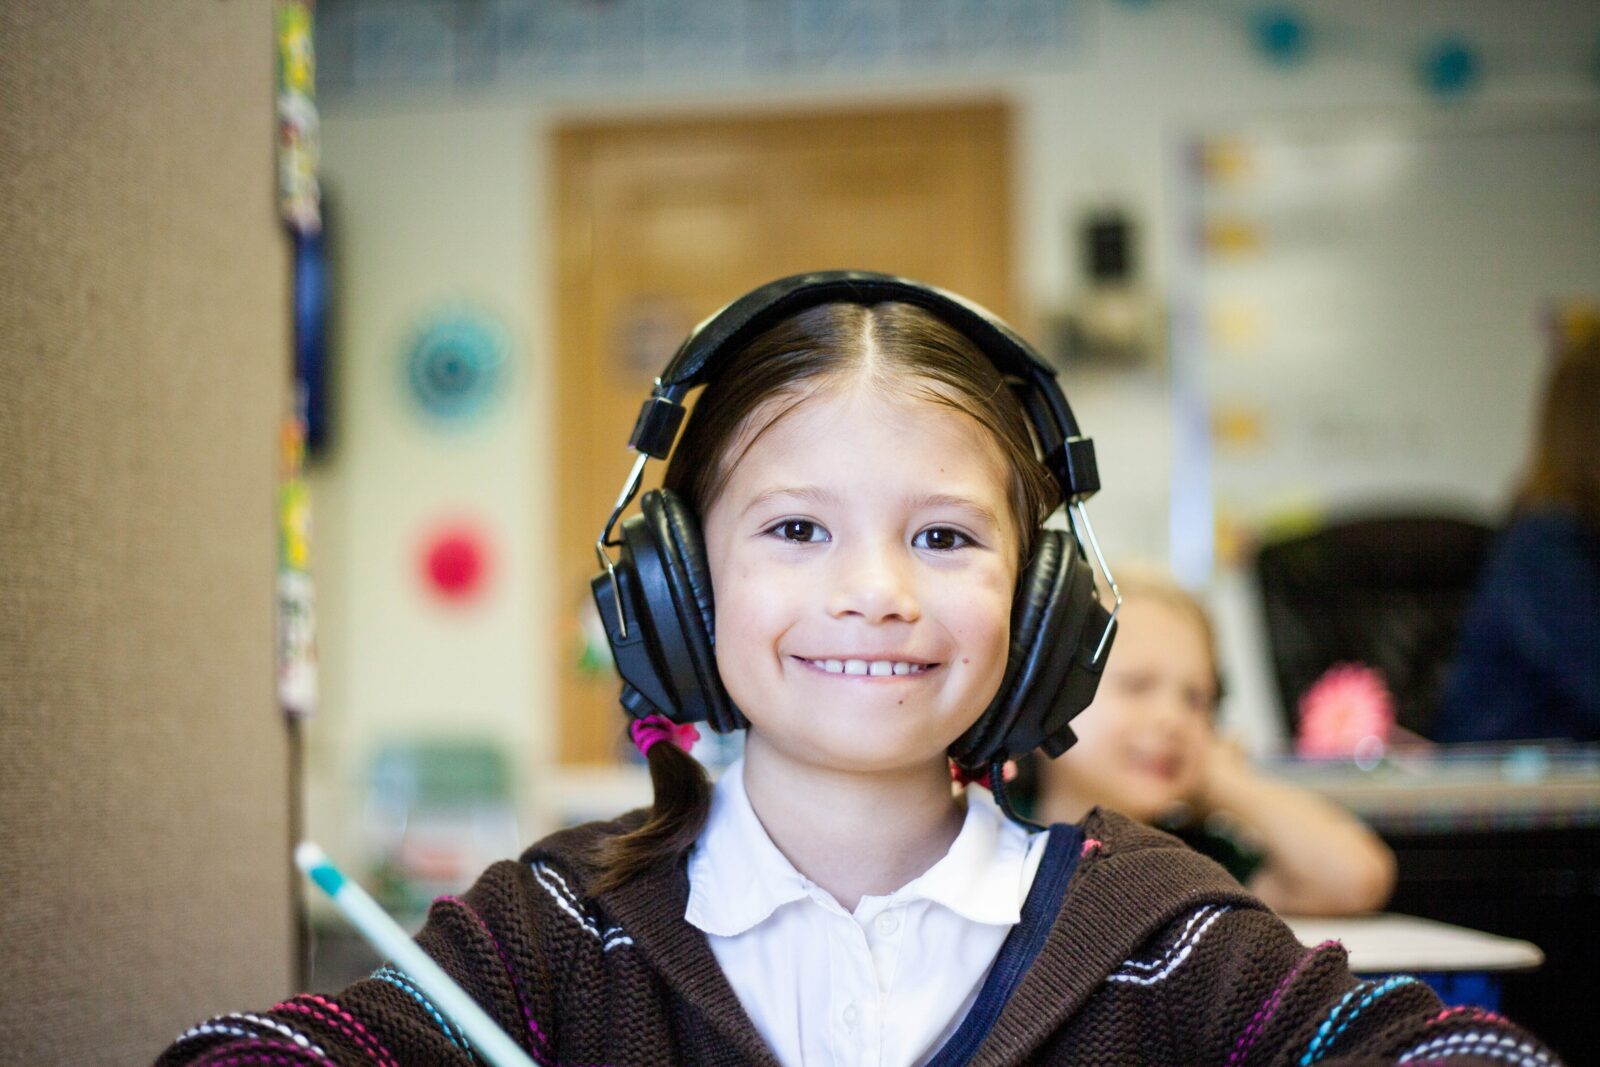 A young girl in a classroom wearing full-coverage headphones and smiling